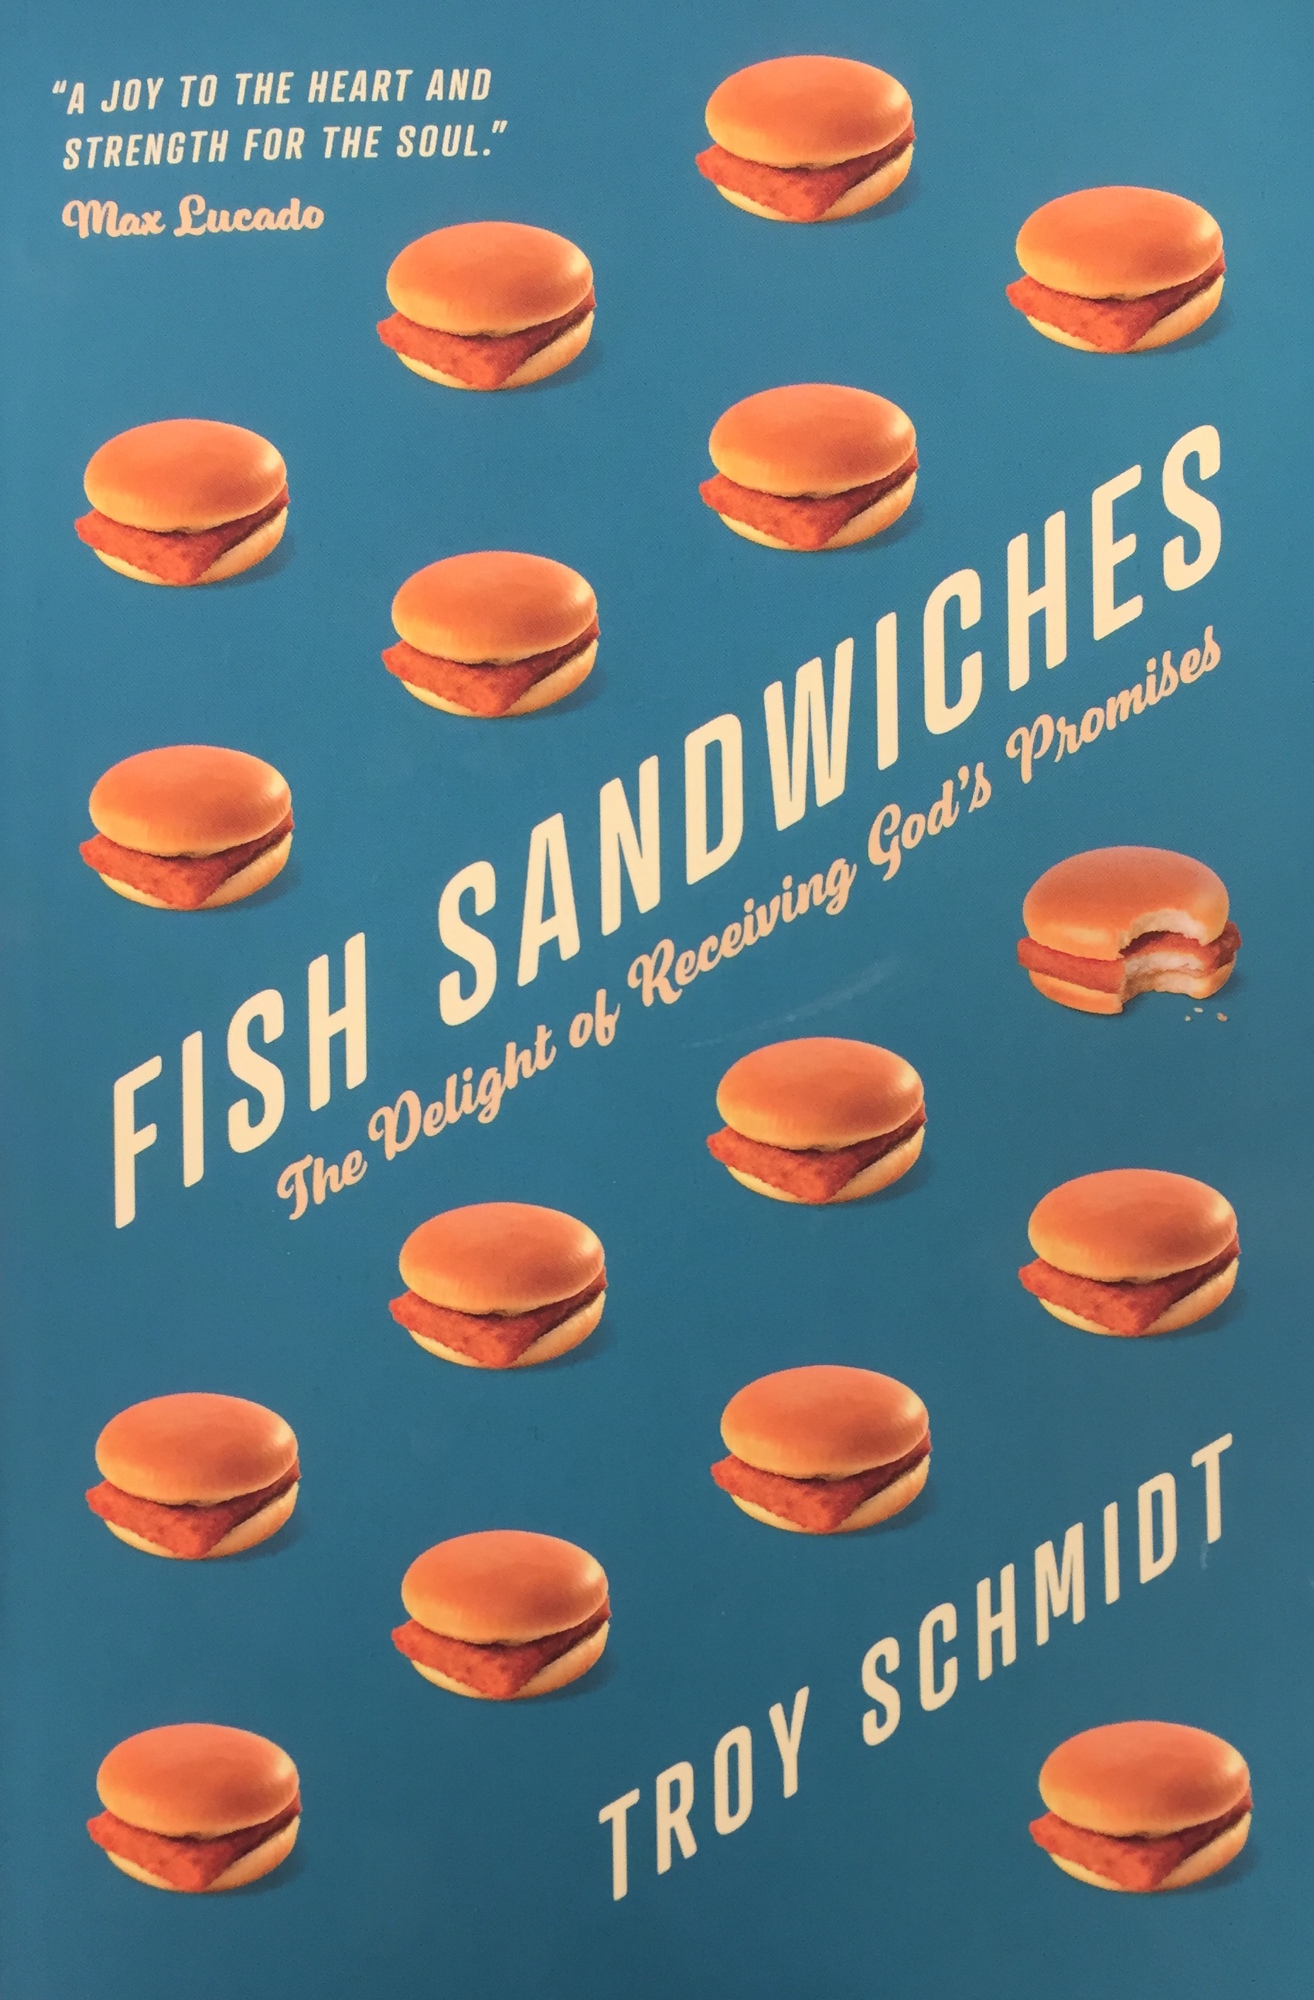 Troy Schmidt’s newest book, “Fish Sandwiches: The Delight of Receiving God’s Promises” is his first original book. He’s authored many other books, but this is a first-of-its-kind for Schmidt. 